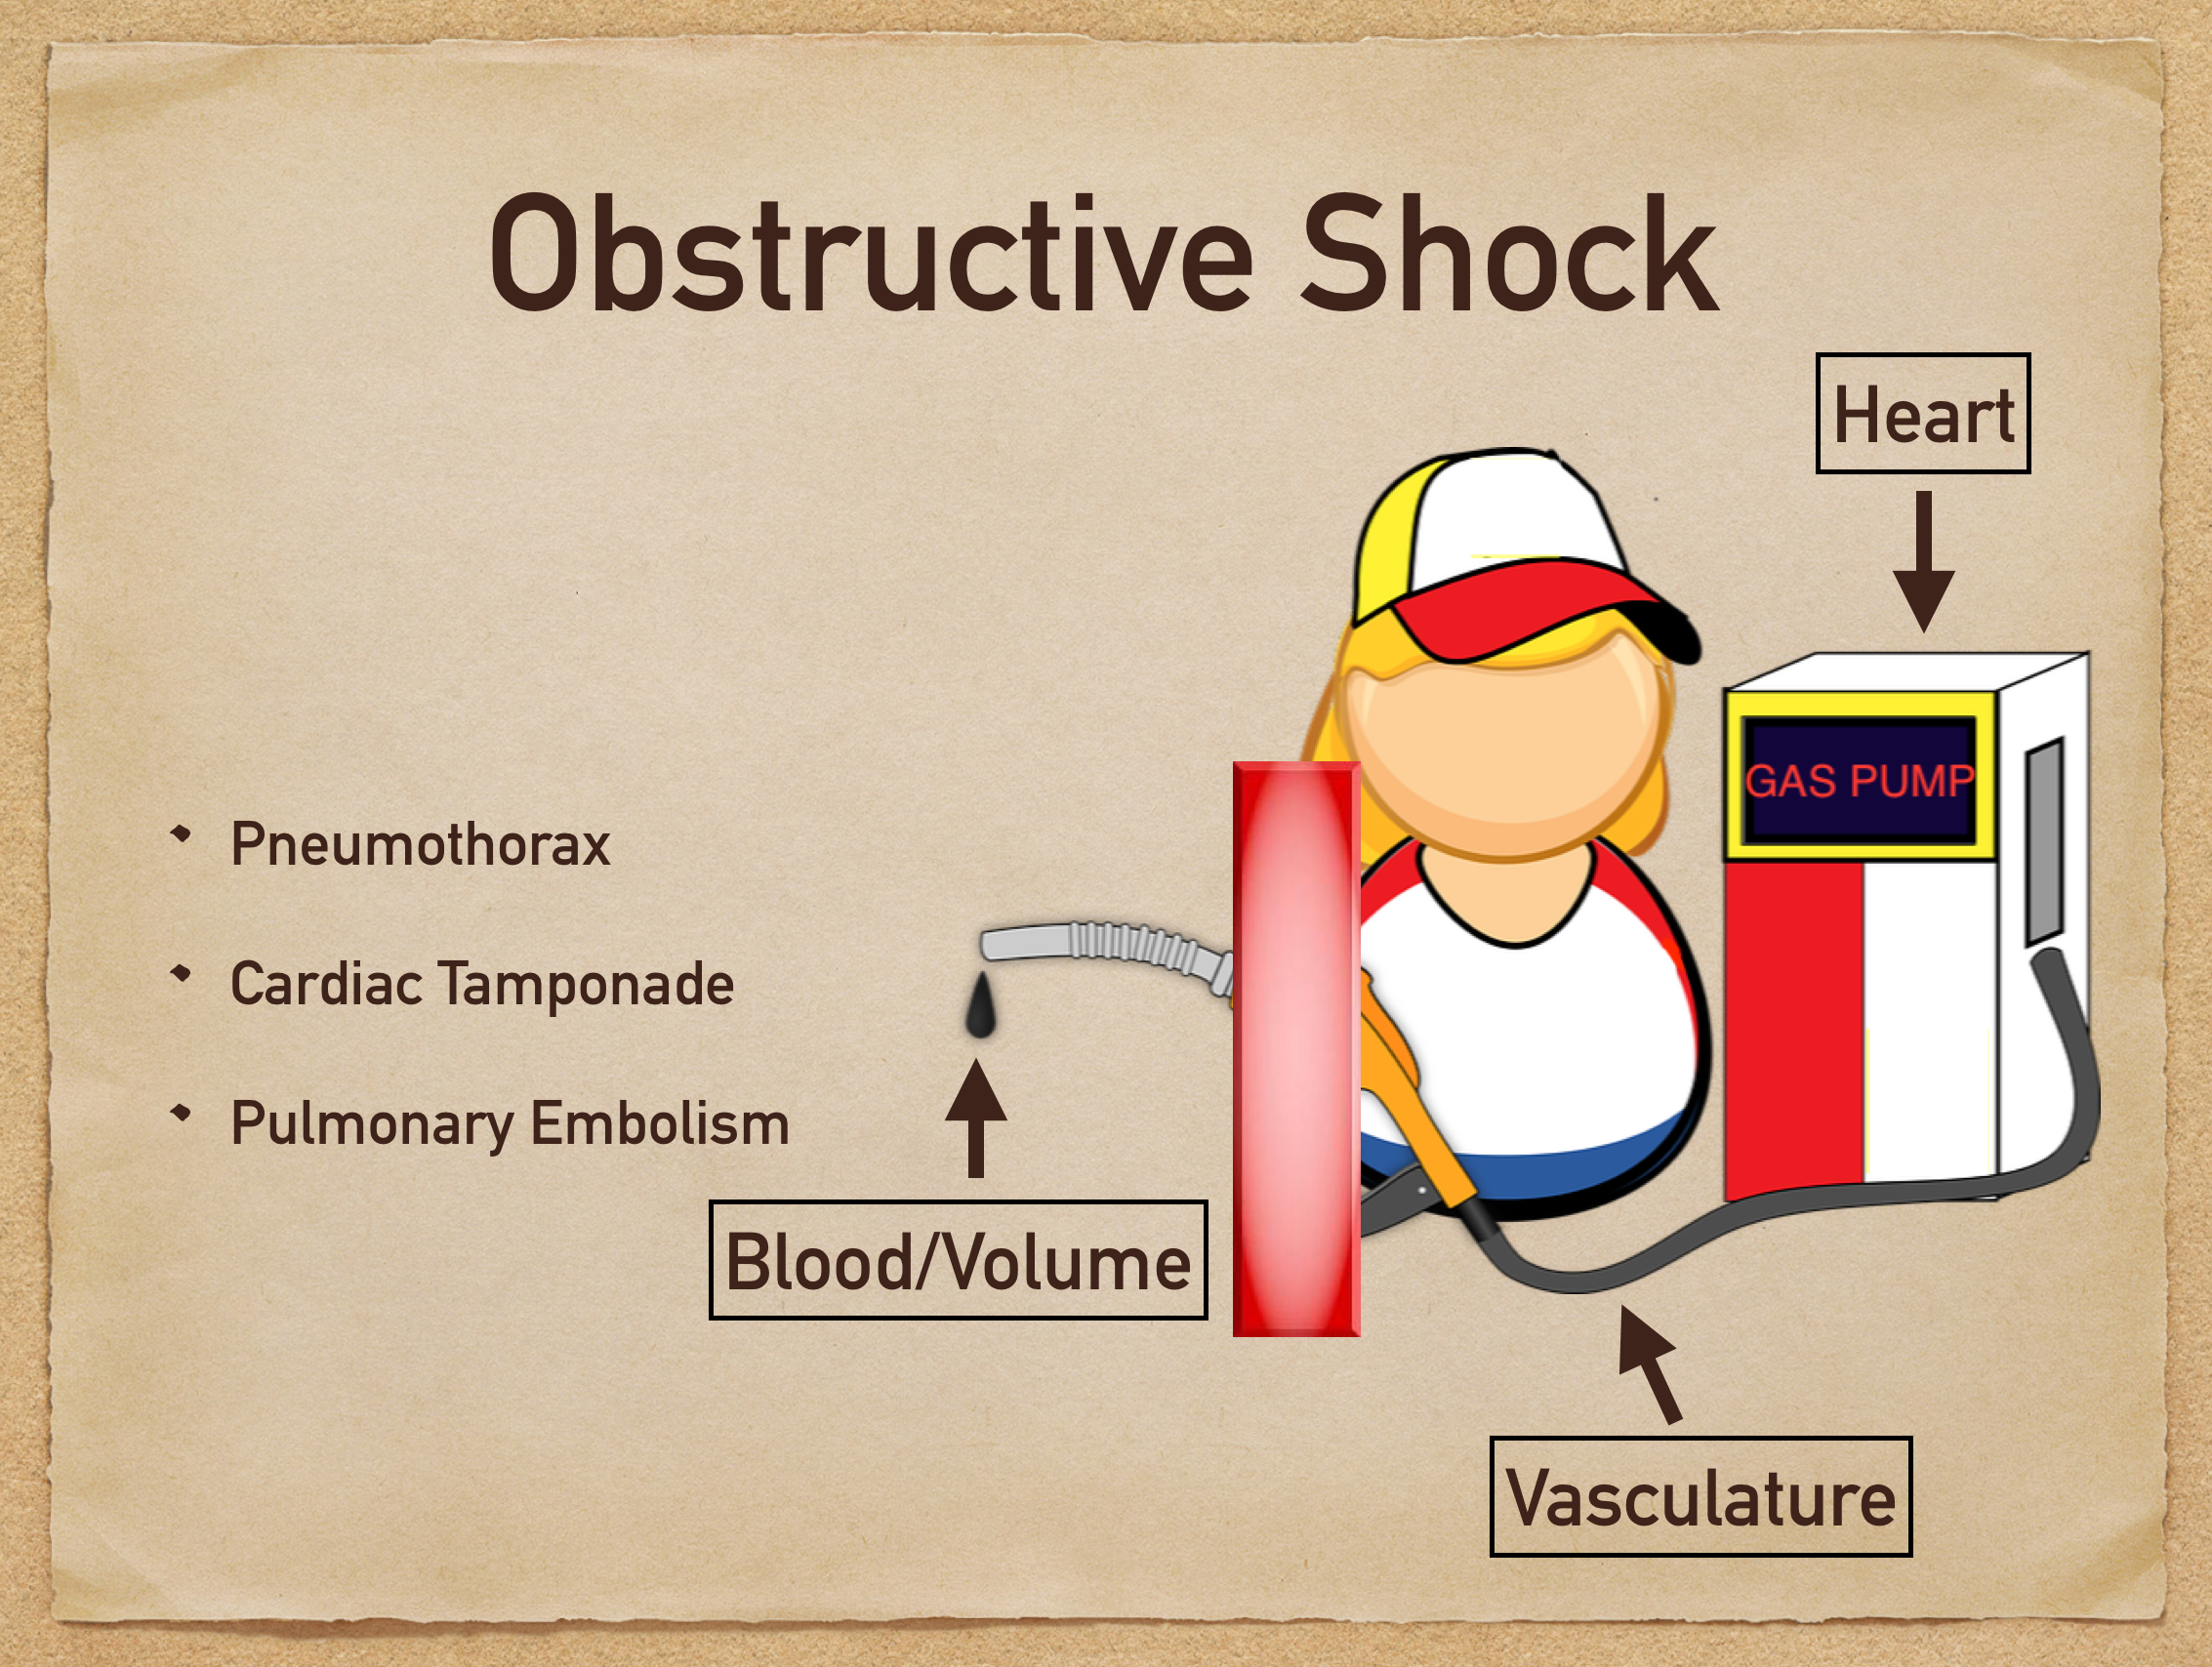 types of shock treatment